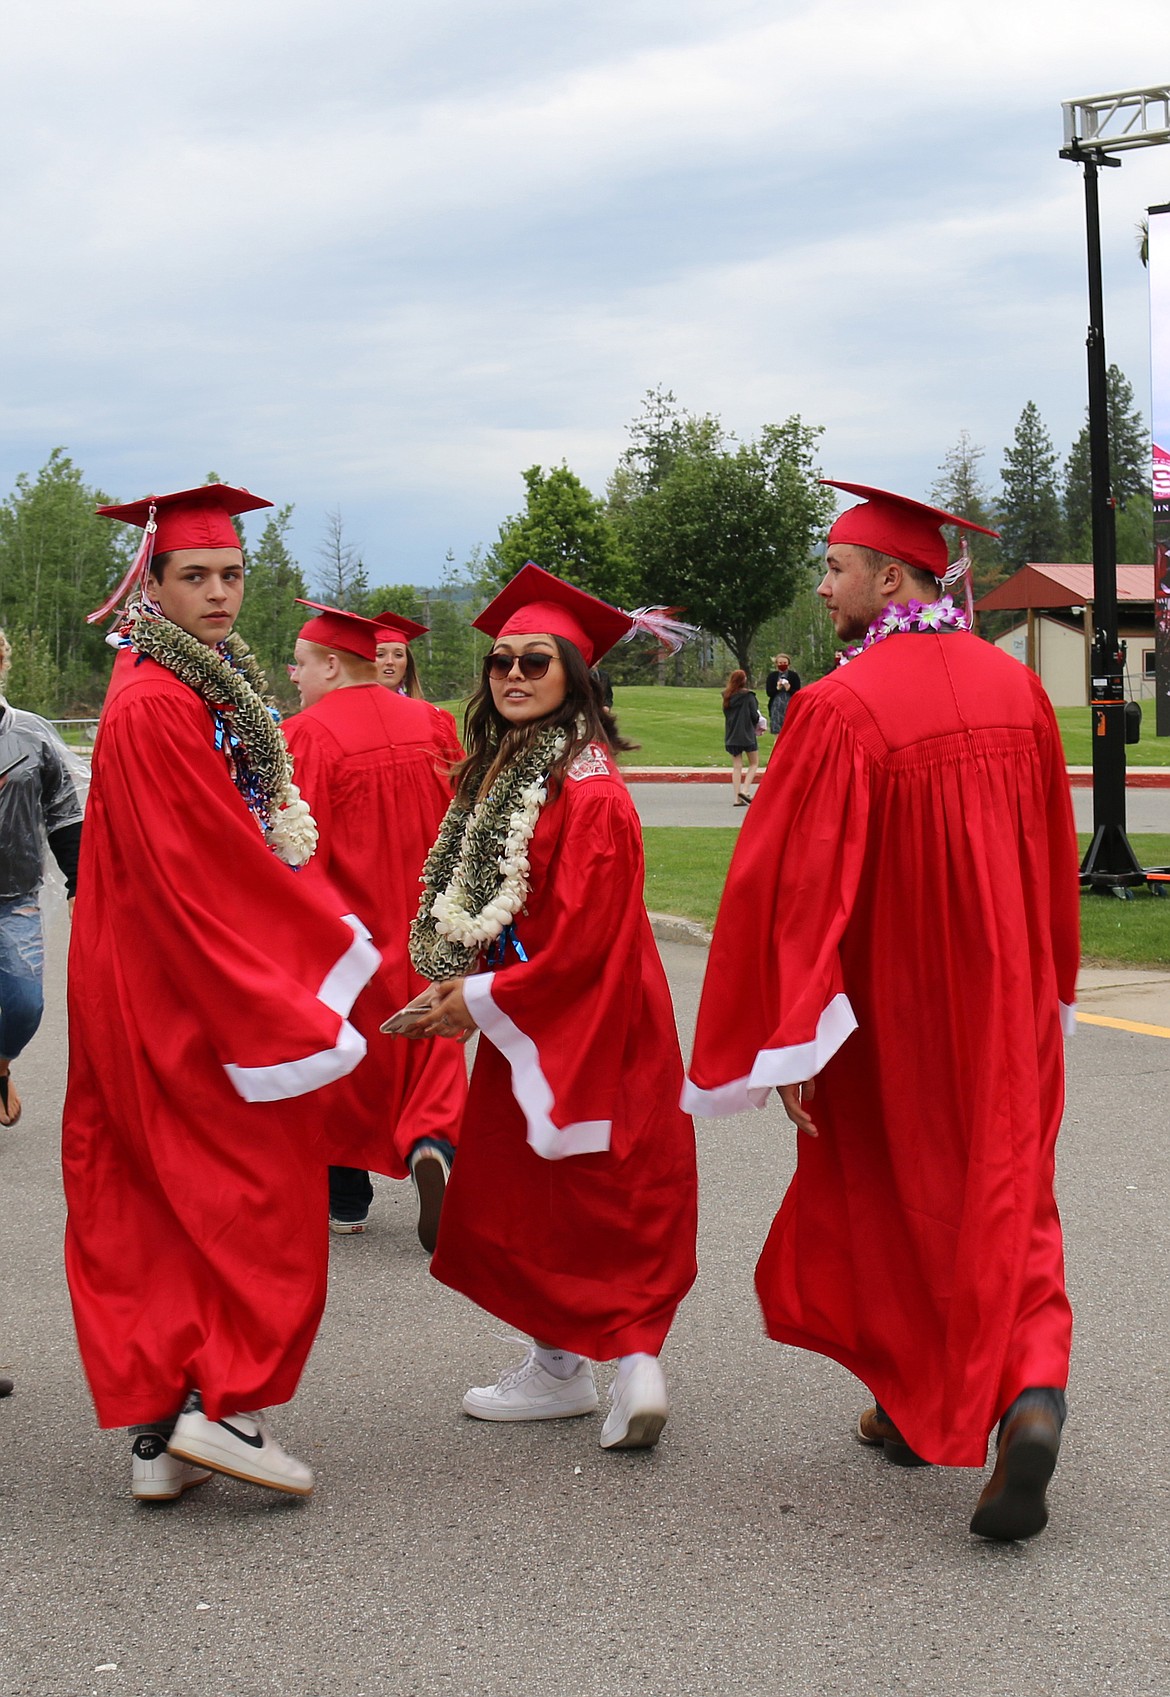 Colton Lunde, Zoey Barajas, and Spencer Rucker get ready to line up to walk across the stage in Friday’s Sandpoint High School commencement ceremony.